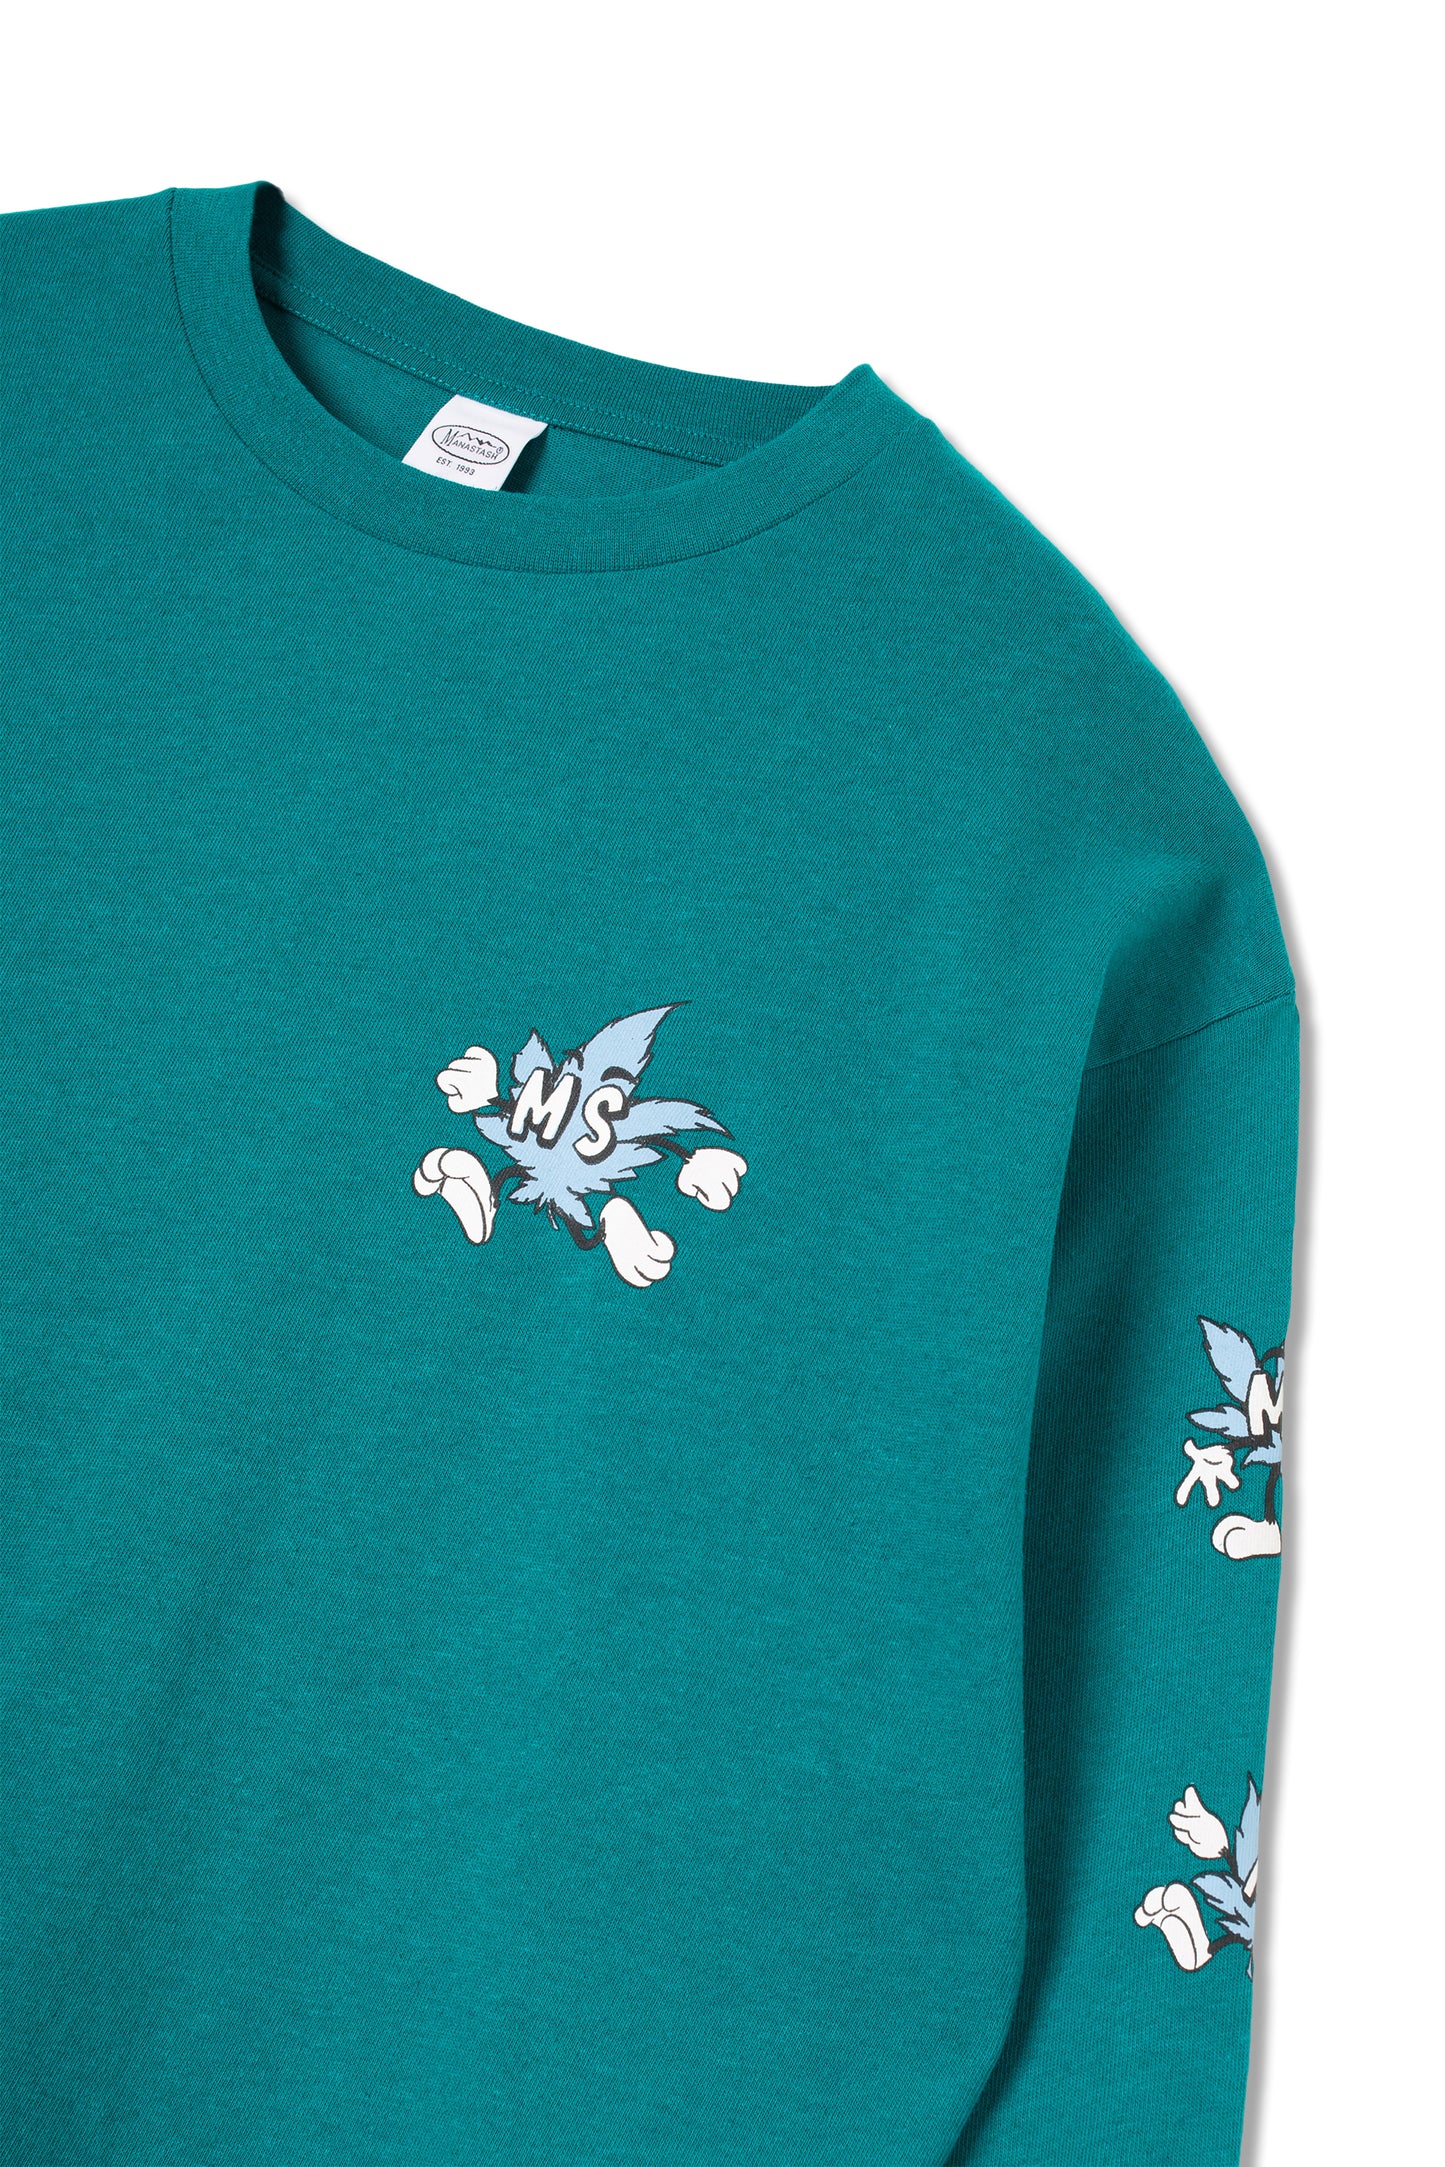 No Name L/S Tee (Ever Green)